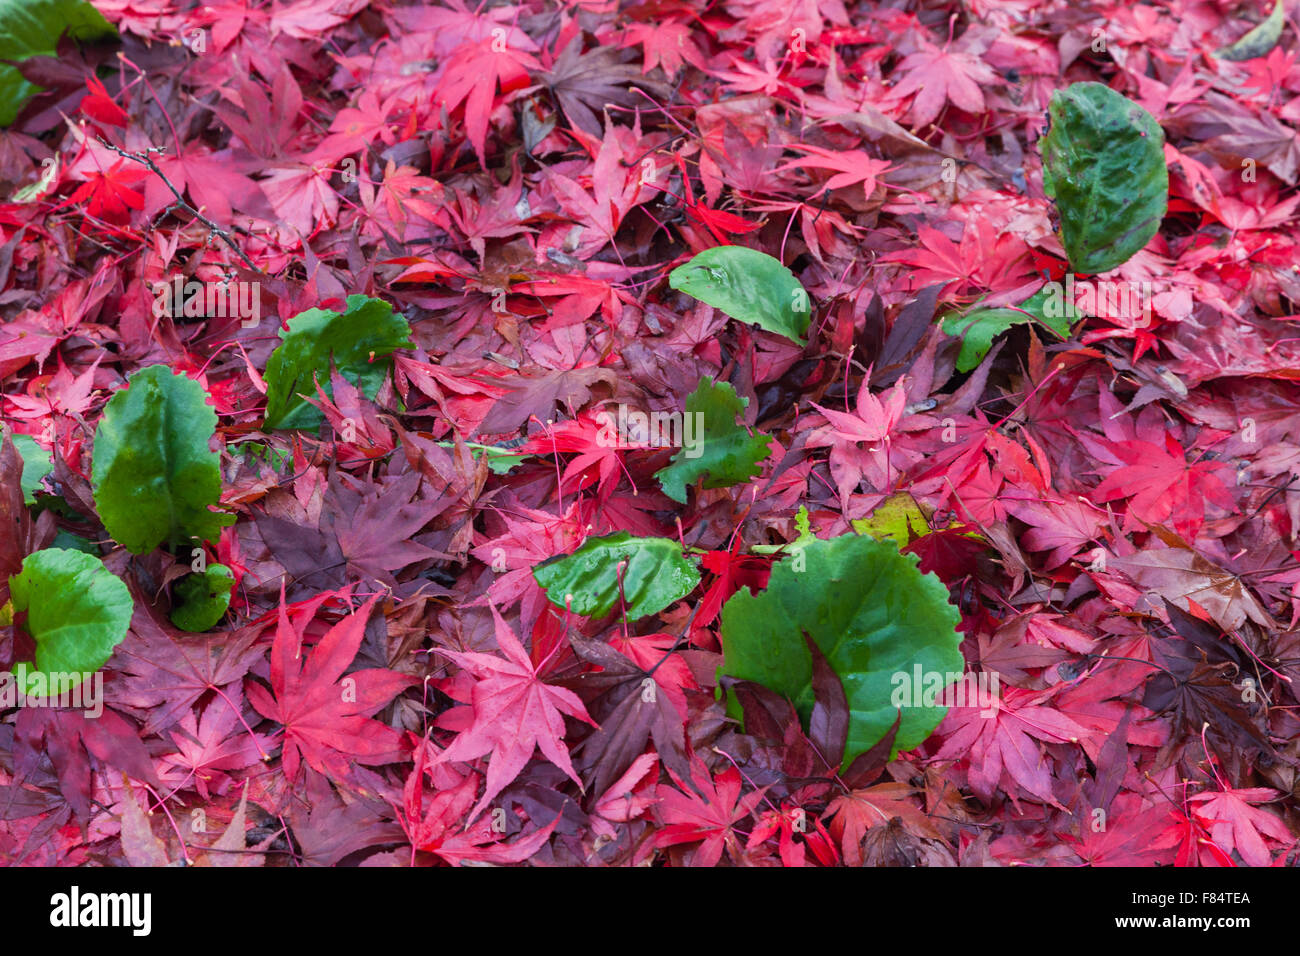 Carpet of red maple leaves on small green plants Stock Photo